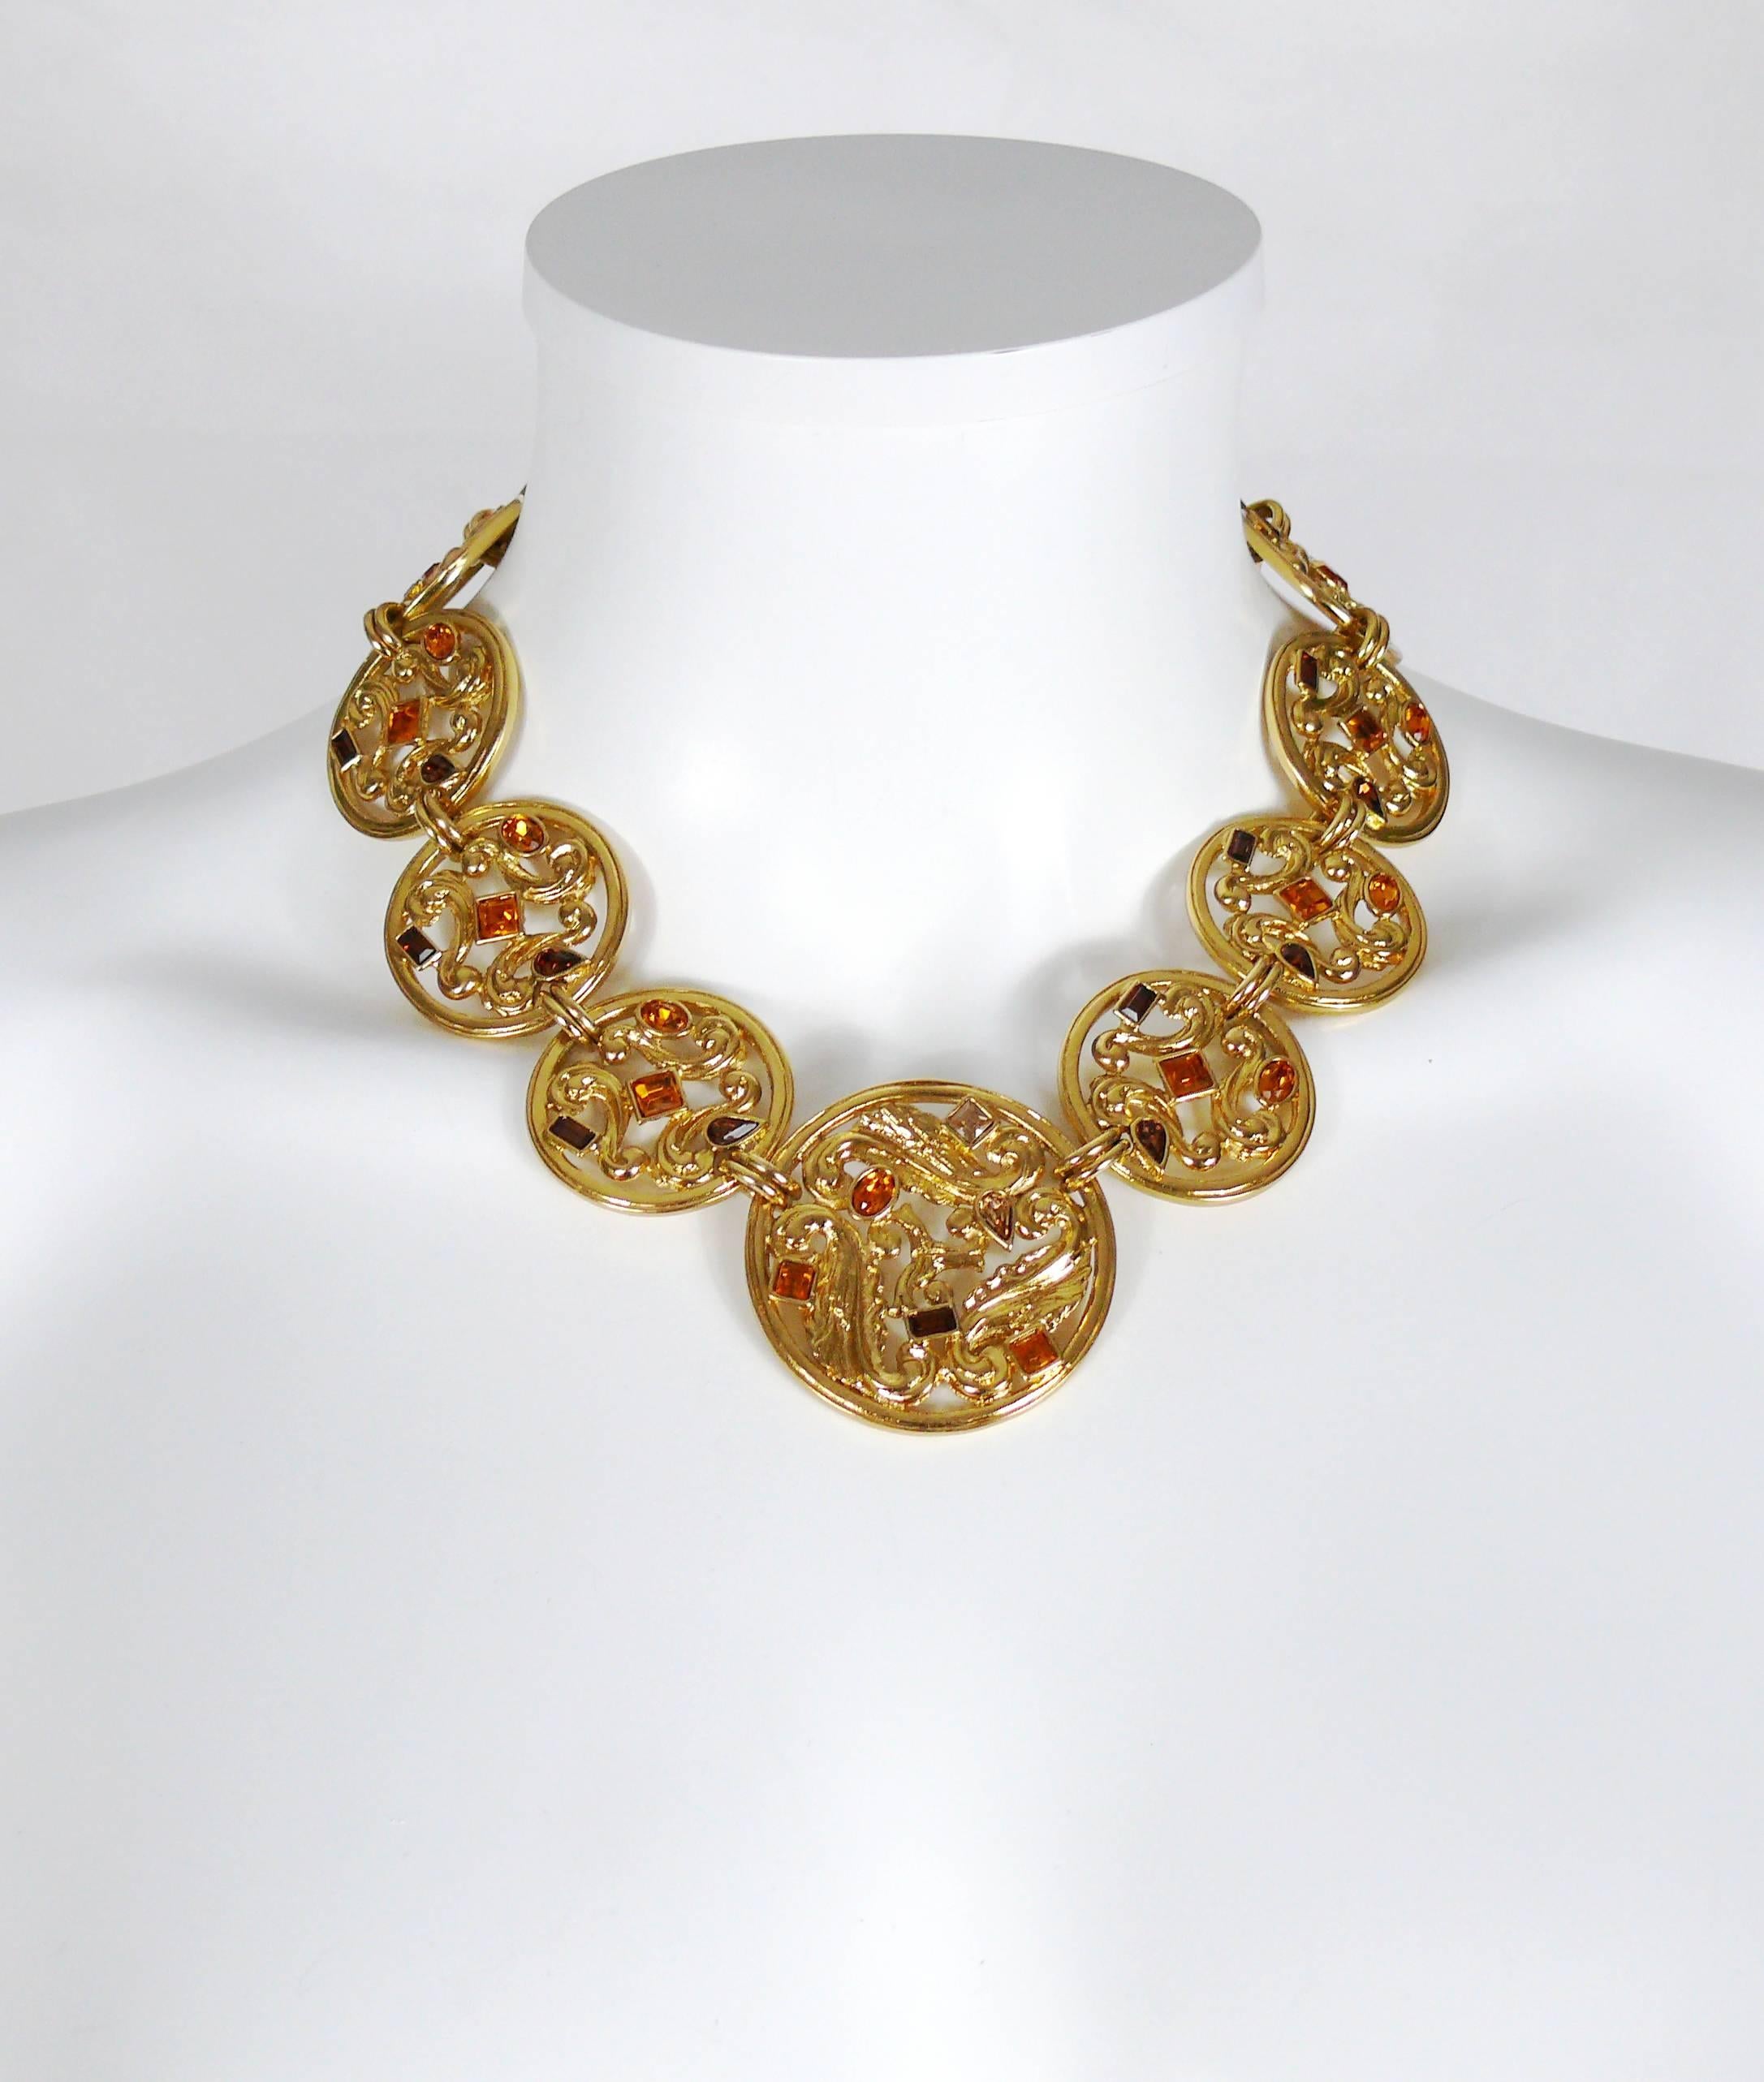 YVES SAINT LAURENT vintage gold toned medallion necklace featuring an openwork scroll design with crystal embellishement.

Lobster clasp closure with extension chain.

Embossed YSL Made in France on the clasp.

Indicative measurements : max. length